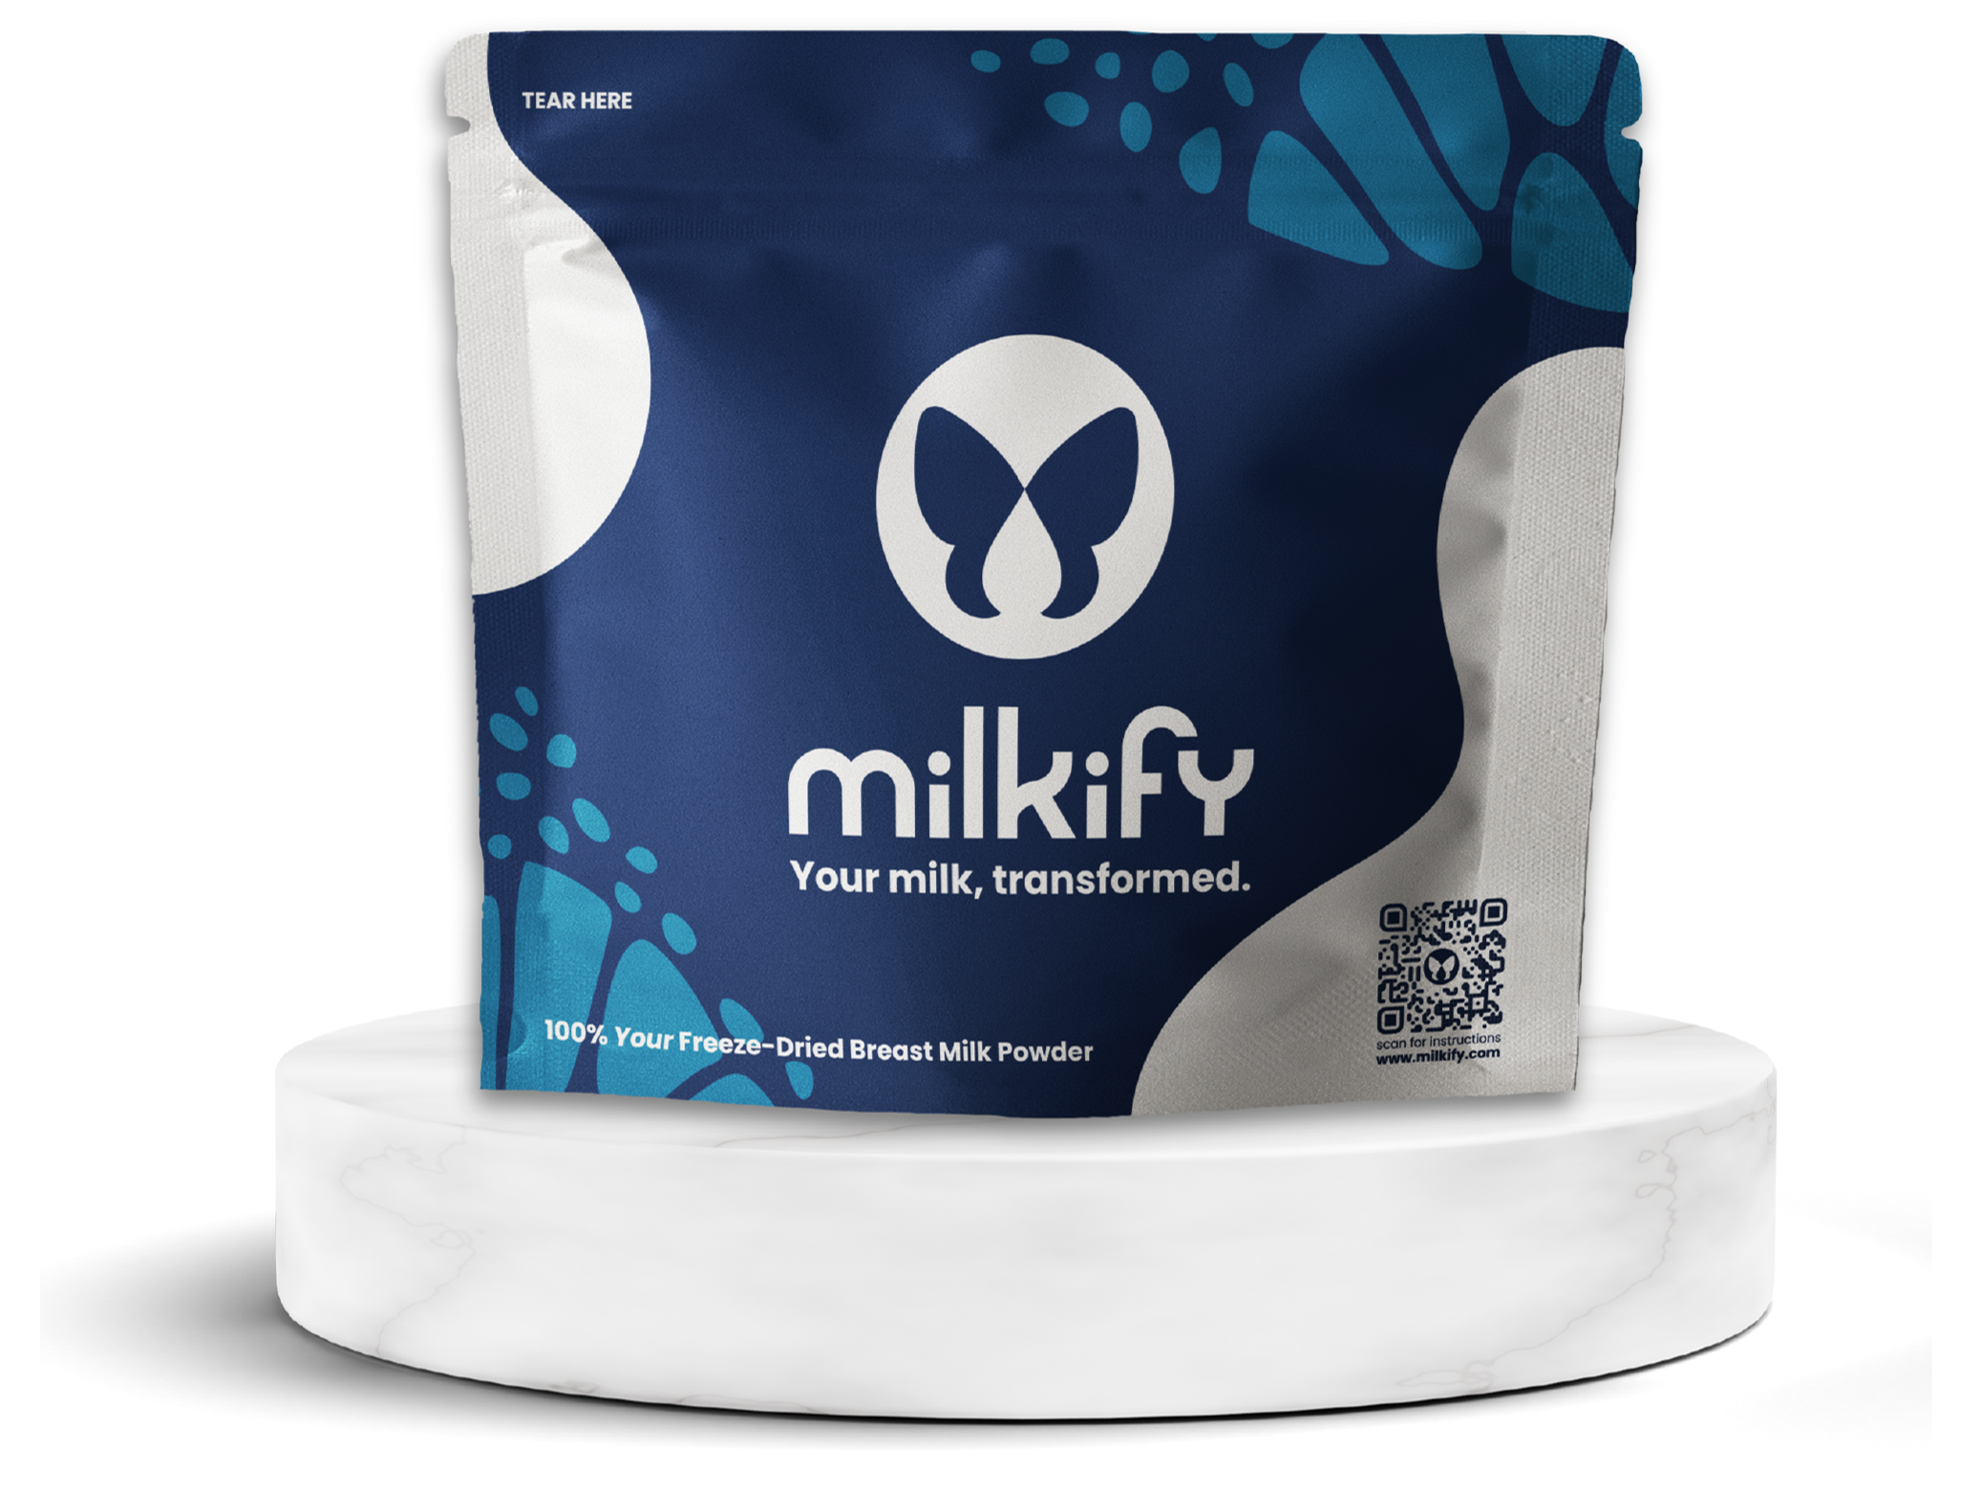 Have You Heard of Milk in a Bag? | DRGNews